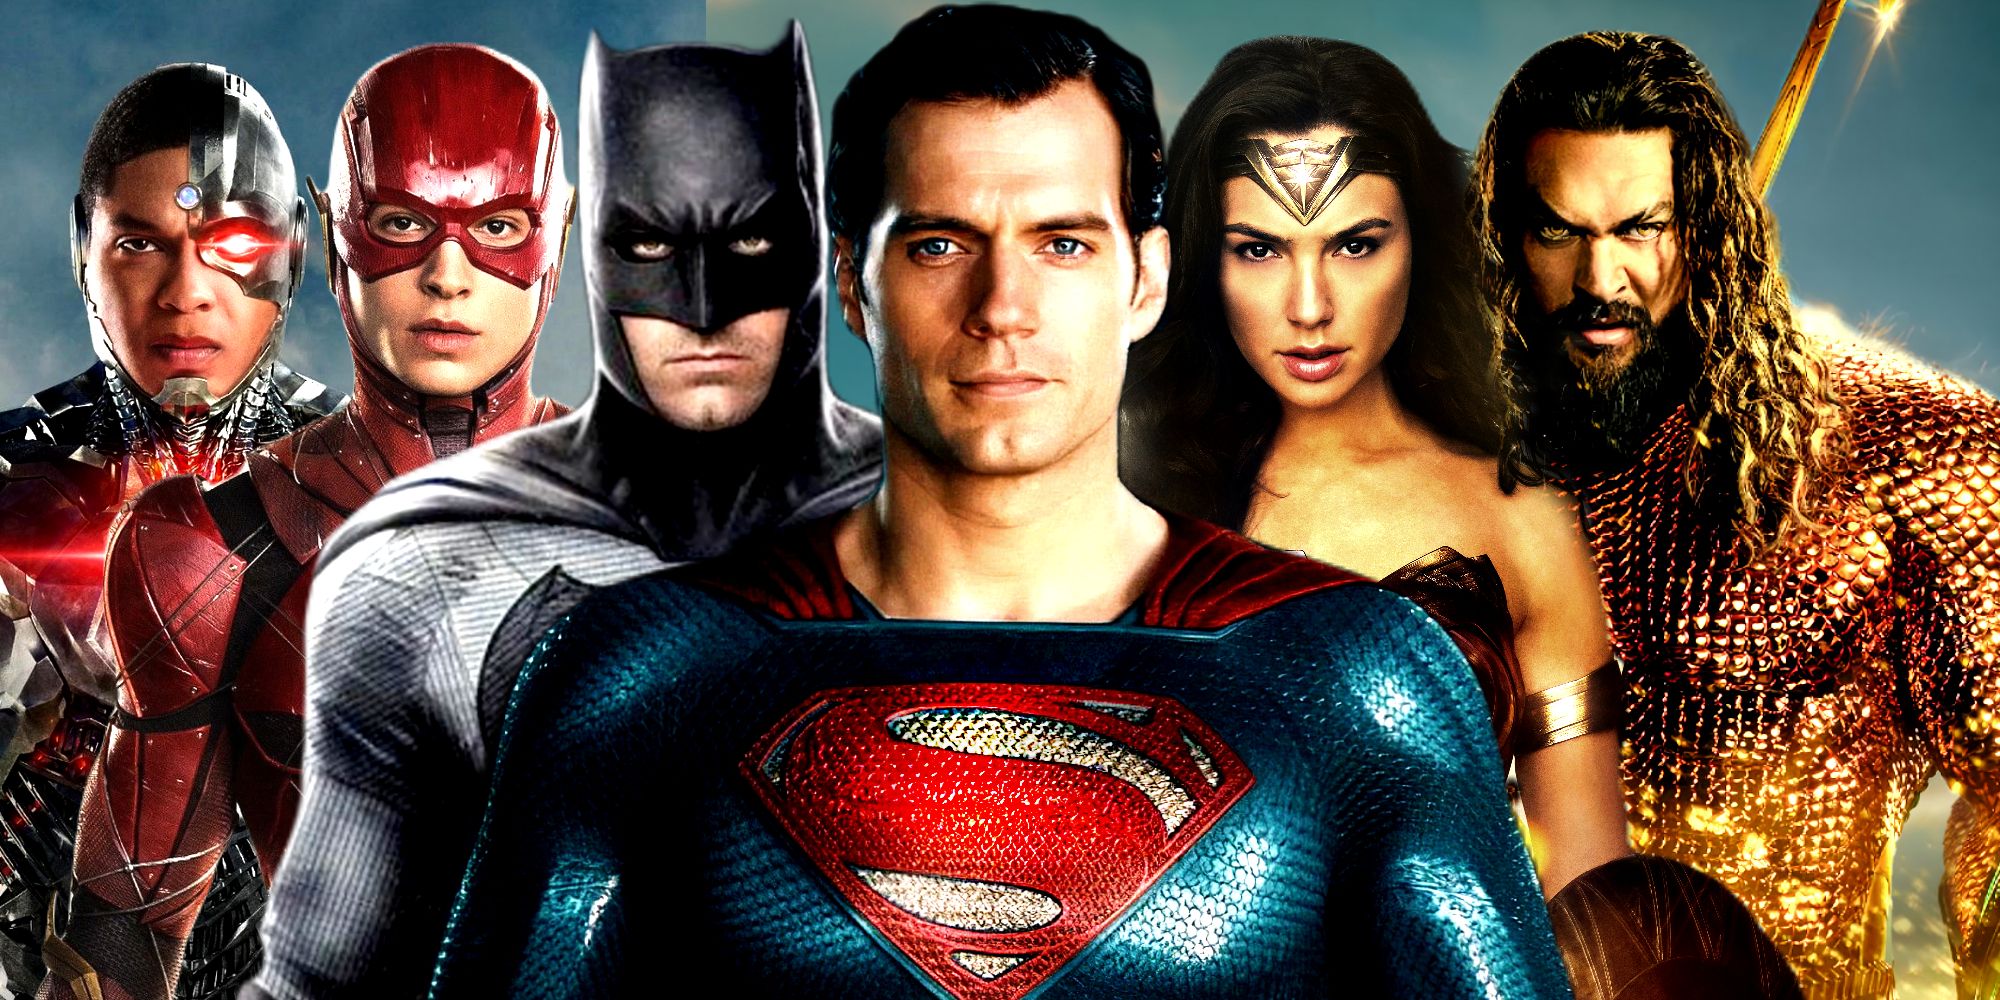 Predicting What Happened To All 6 Justice League Members After The DCEU